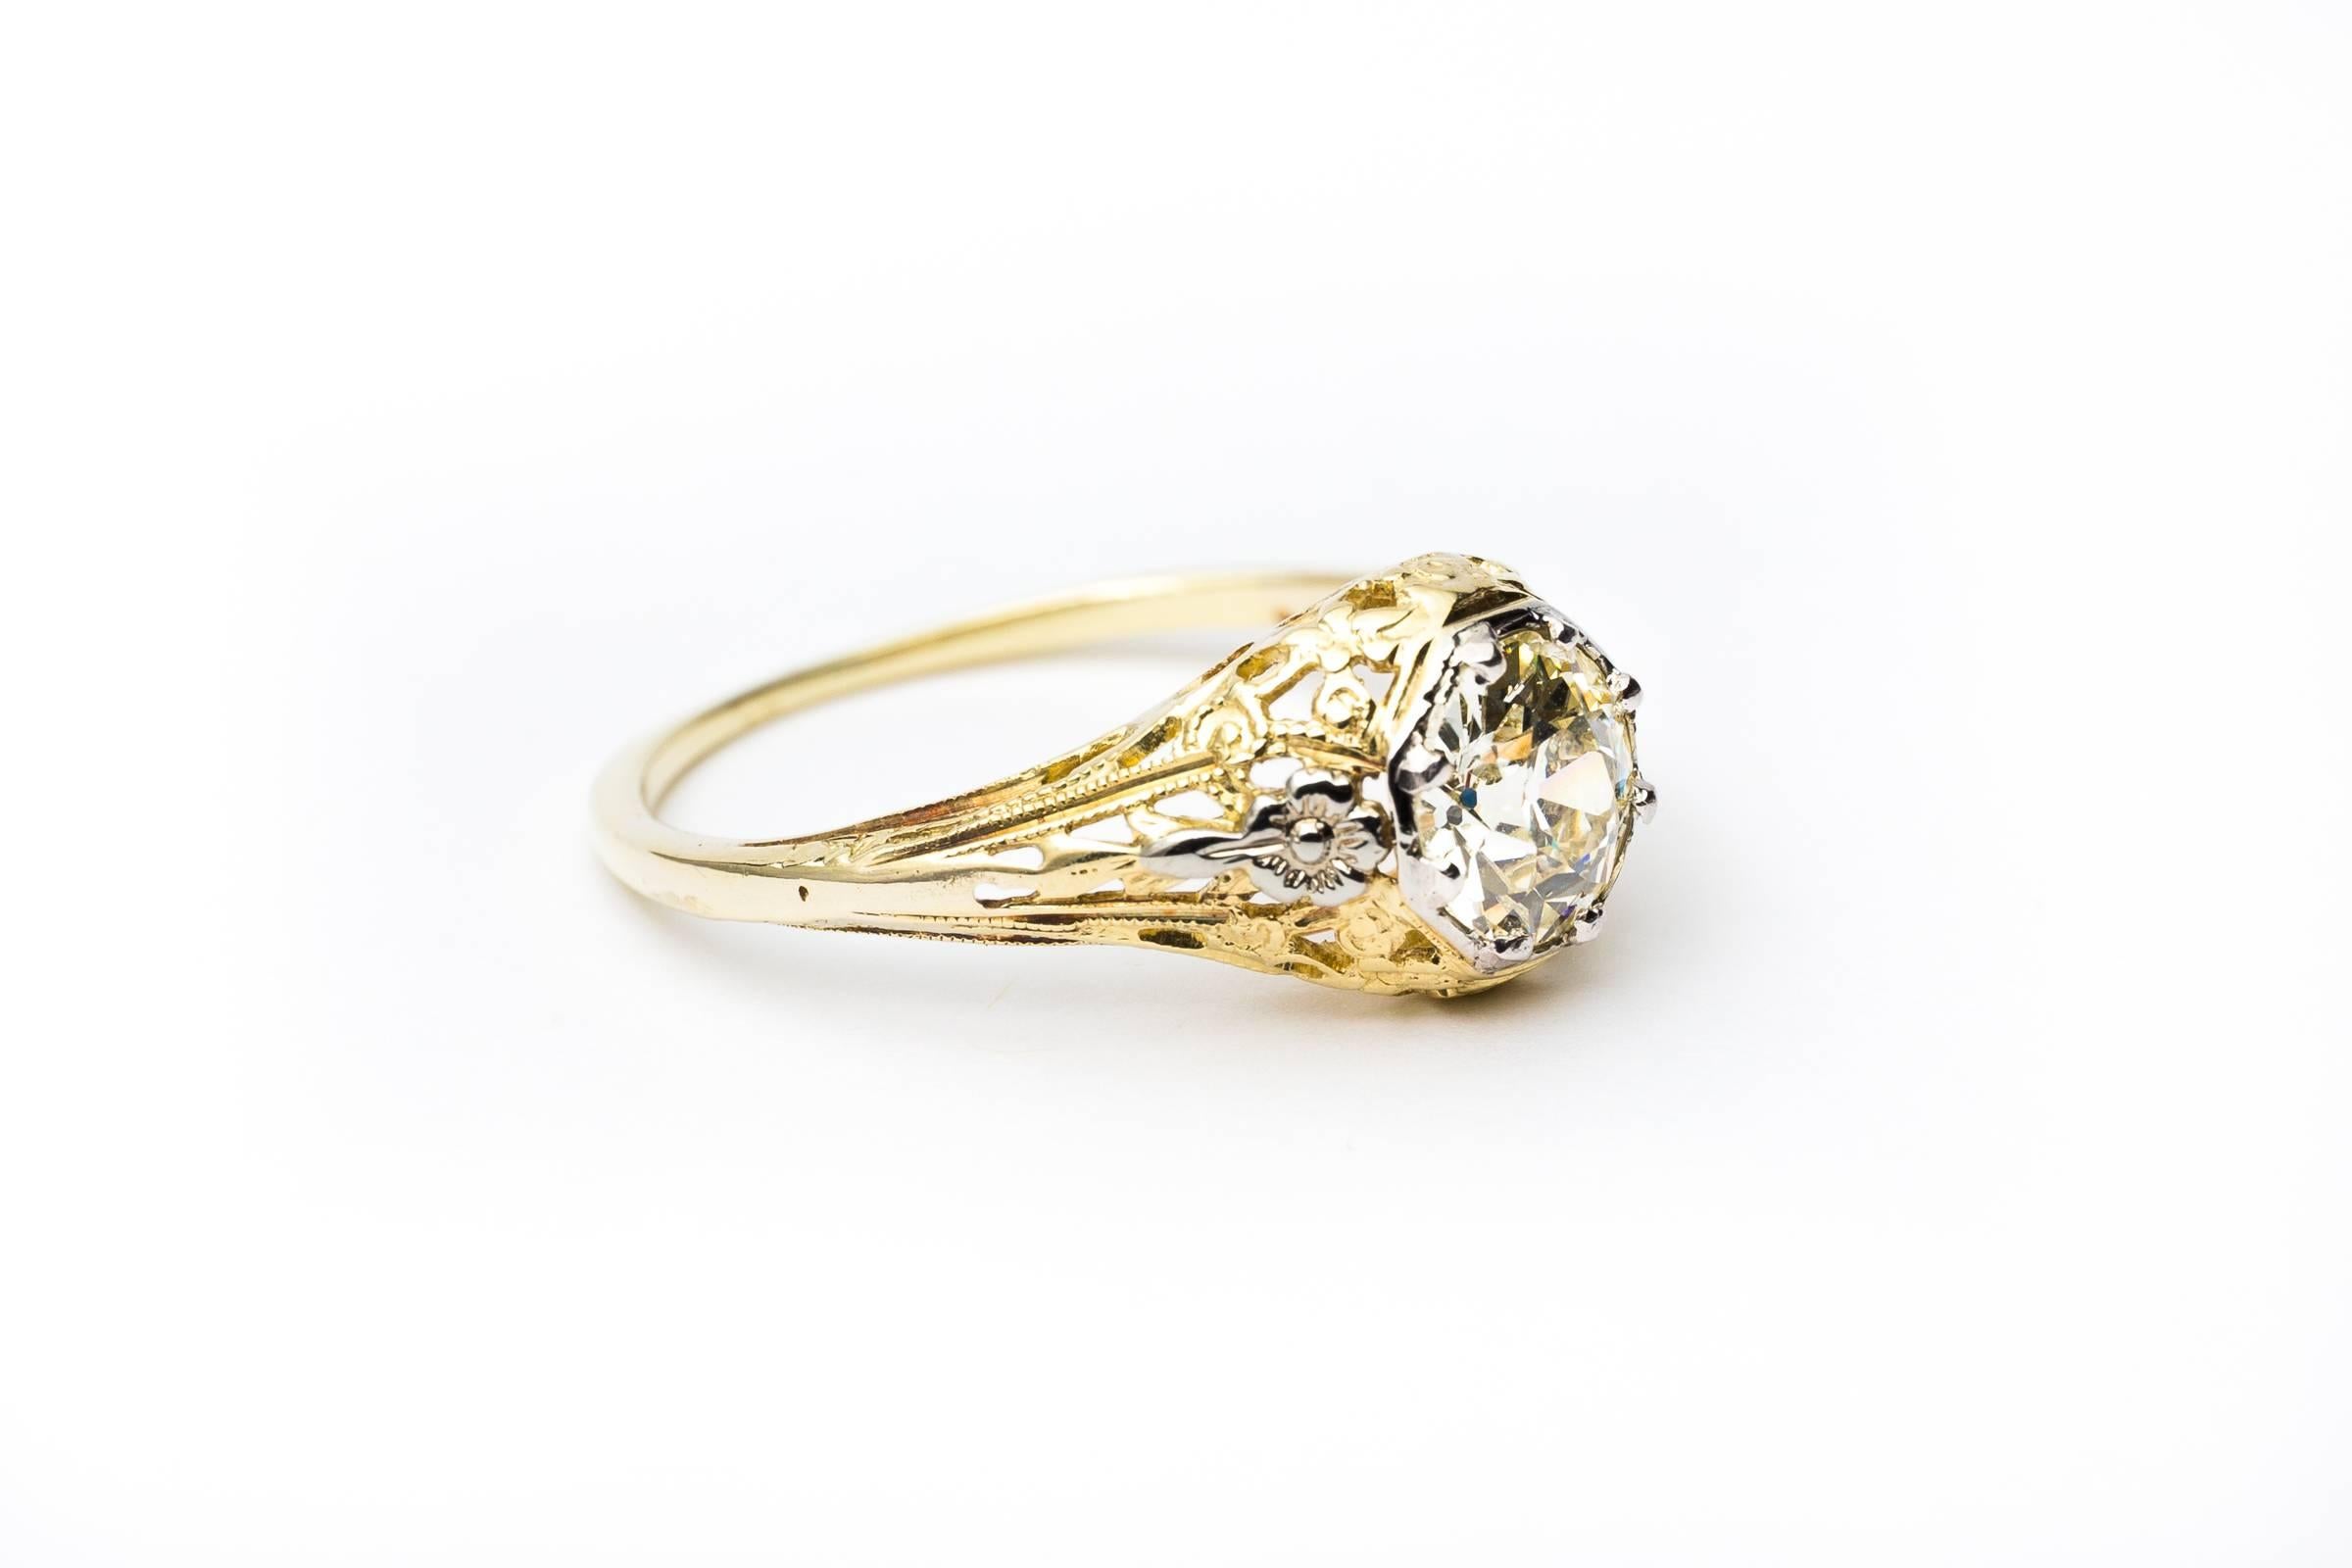 Beacon Hill Jewelers Presents:

A beautiful edwardian period diamond solitaire engagement ring in luxurious platinum & 18 karat yellow gold. Boasting hand carved platinum flowers and a platinum head securing the sparkling diamond this ring